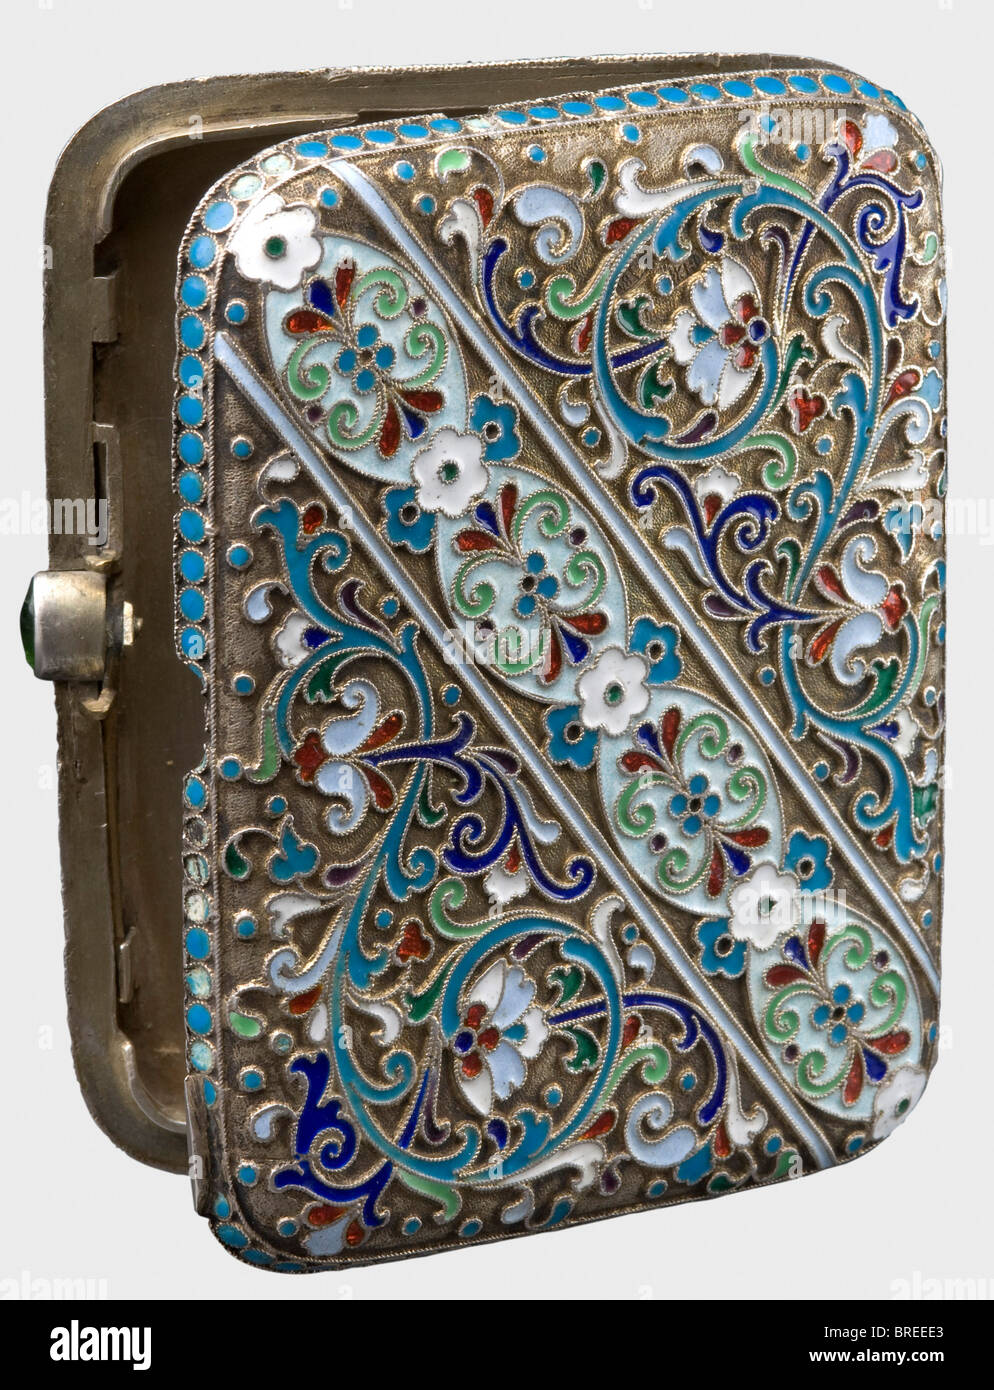 A cloisonné cigarette case, unknown master 'NJ', Moscow, circa 1910 Gilt silver, fine floral enamel work. Cyrillic master's mark, 'NJ' and the Moscow hallmark for '84' zolotniki. Dimensions 9.6 x 7.5 cm. Weight 154 g. historic, historical, 1910s, 20th century, object, objects, stills, clipping, clippings, cut out, cut-out, cut-outs, fine arts, art, art object, art objects, artful, precious, collectible, collector's item, collectibles, collector's items, rarity, rarities, Stock Photo